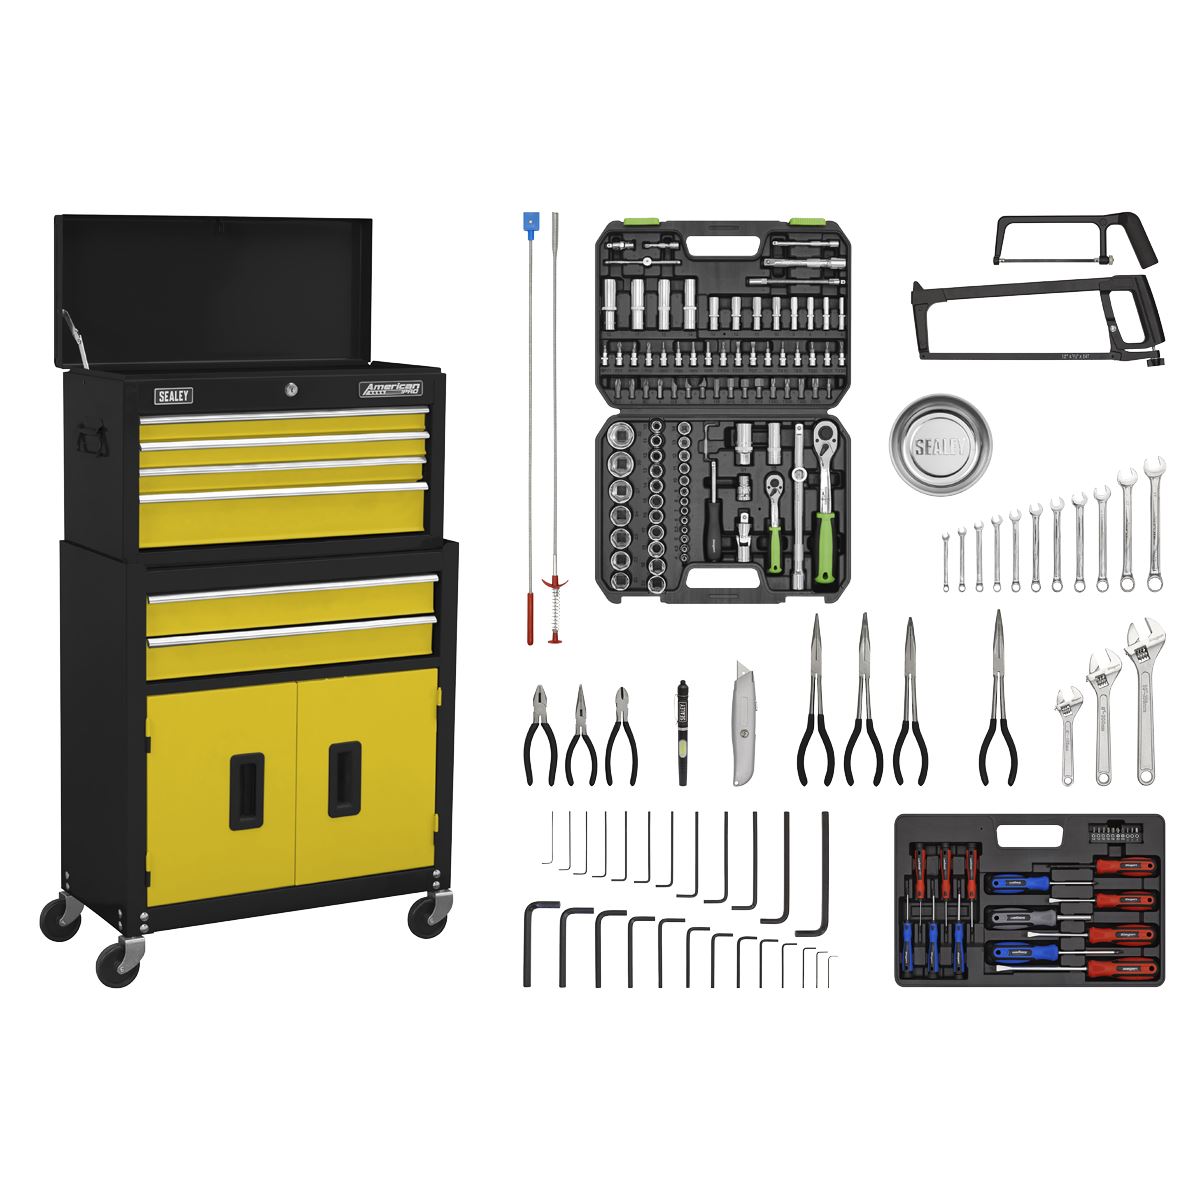 Sealey American Pro Topchest & Rollcab Combination 6 Drawer with Ball-Bearing Slides - Yellow/Black & 170pc Tool Kit